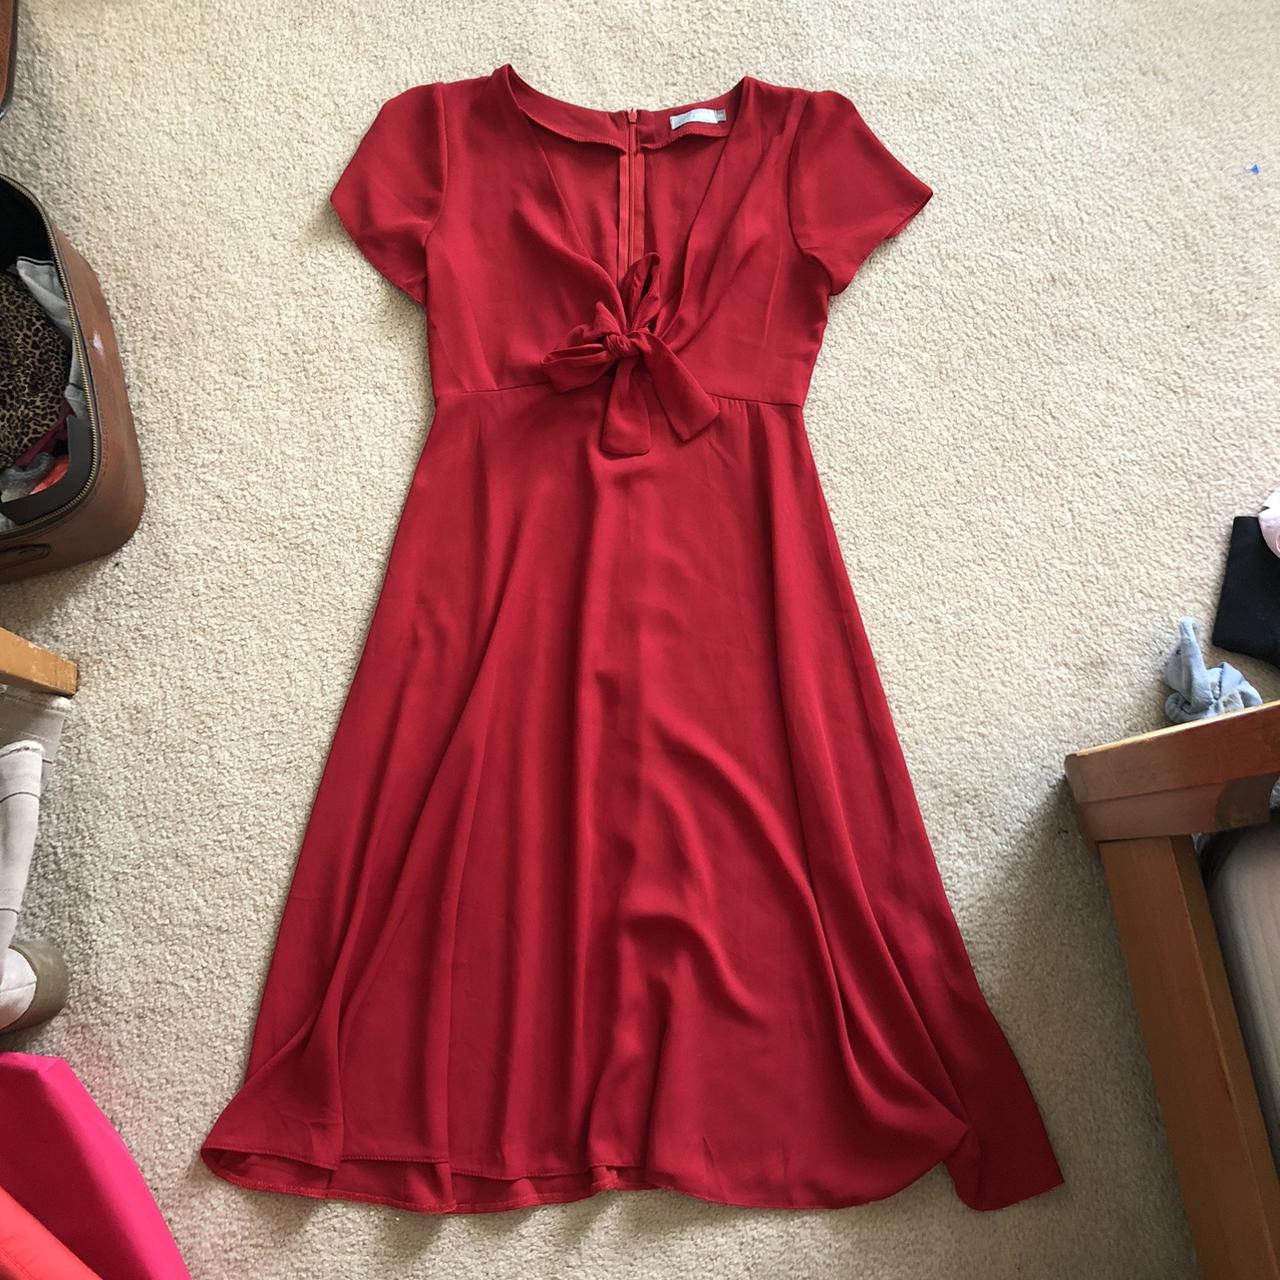 Product Image 1 - Babydoll Red Dress ♥️

Brand: Love
Condition: